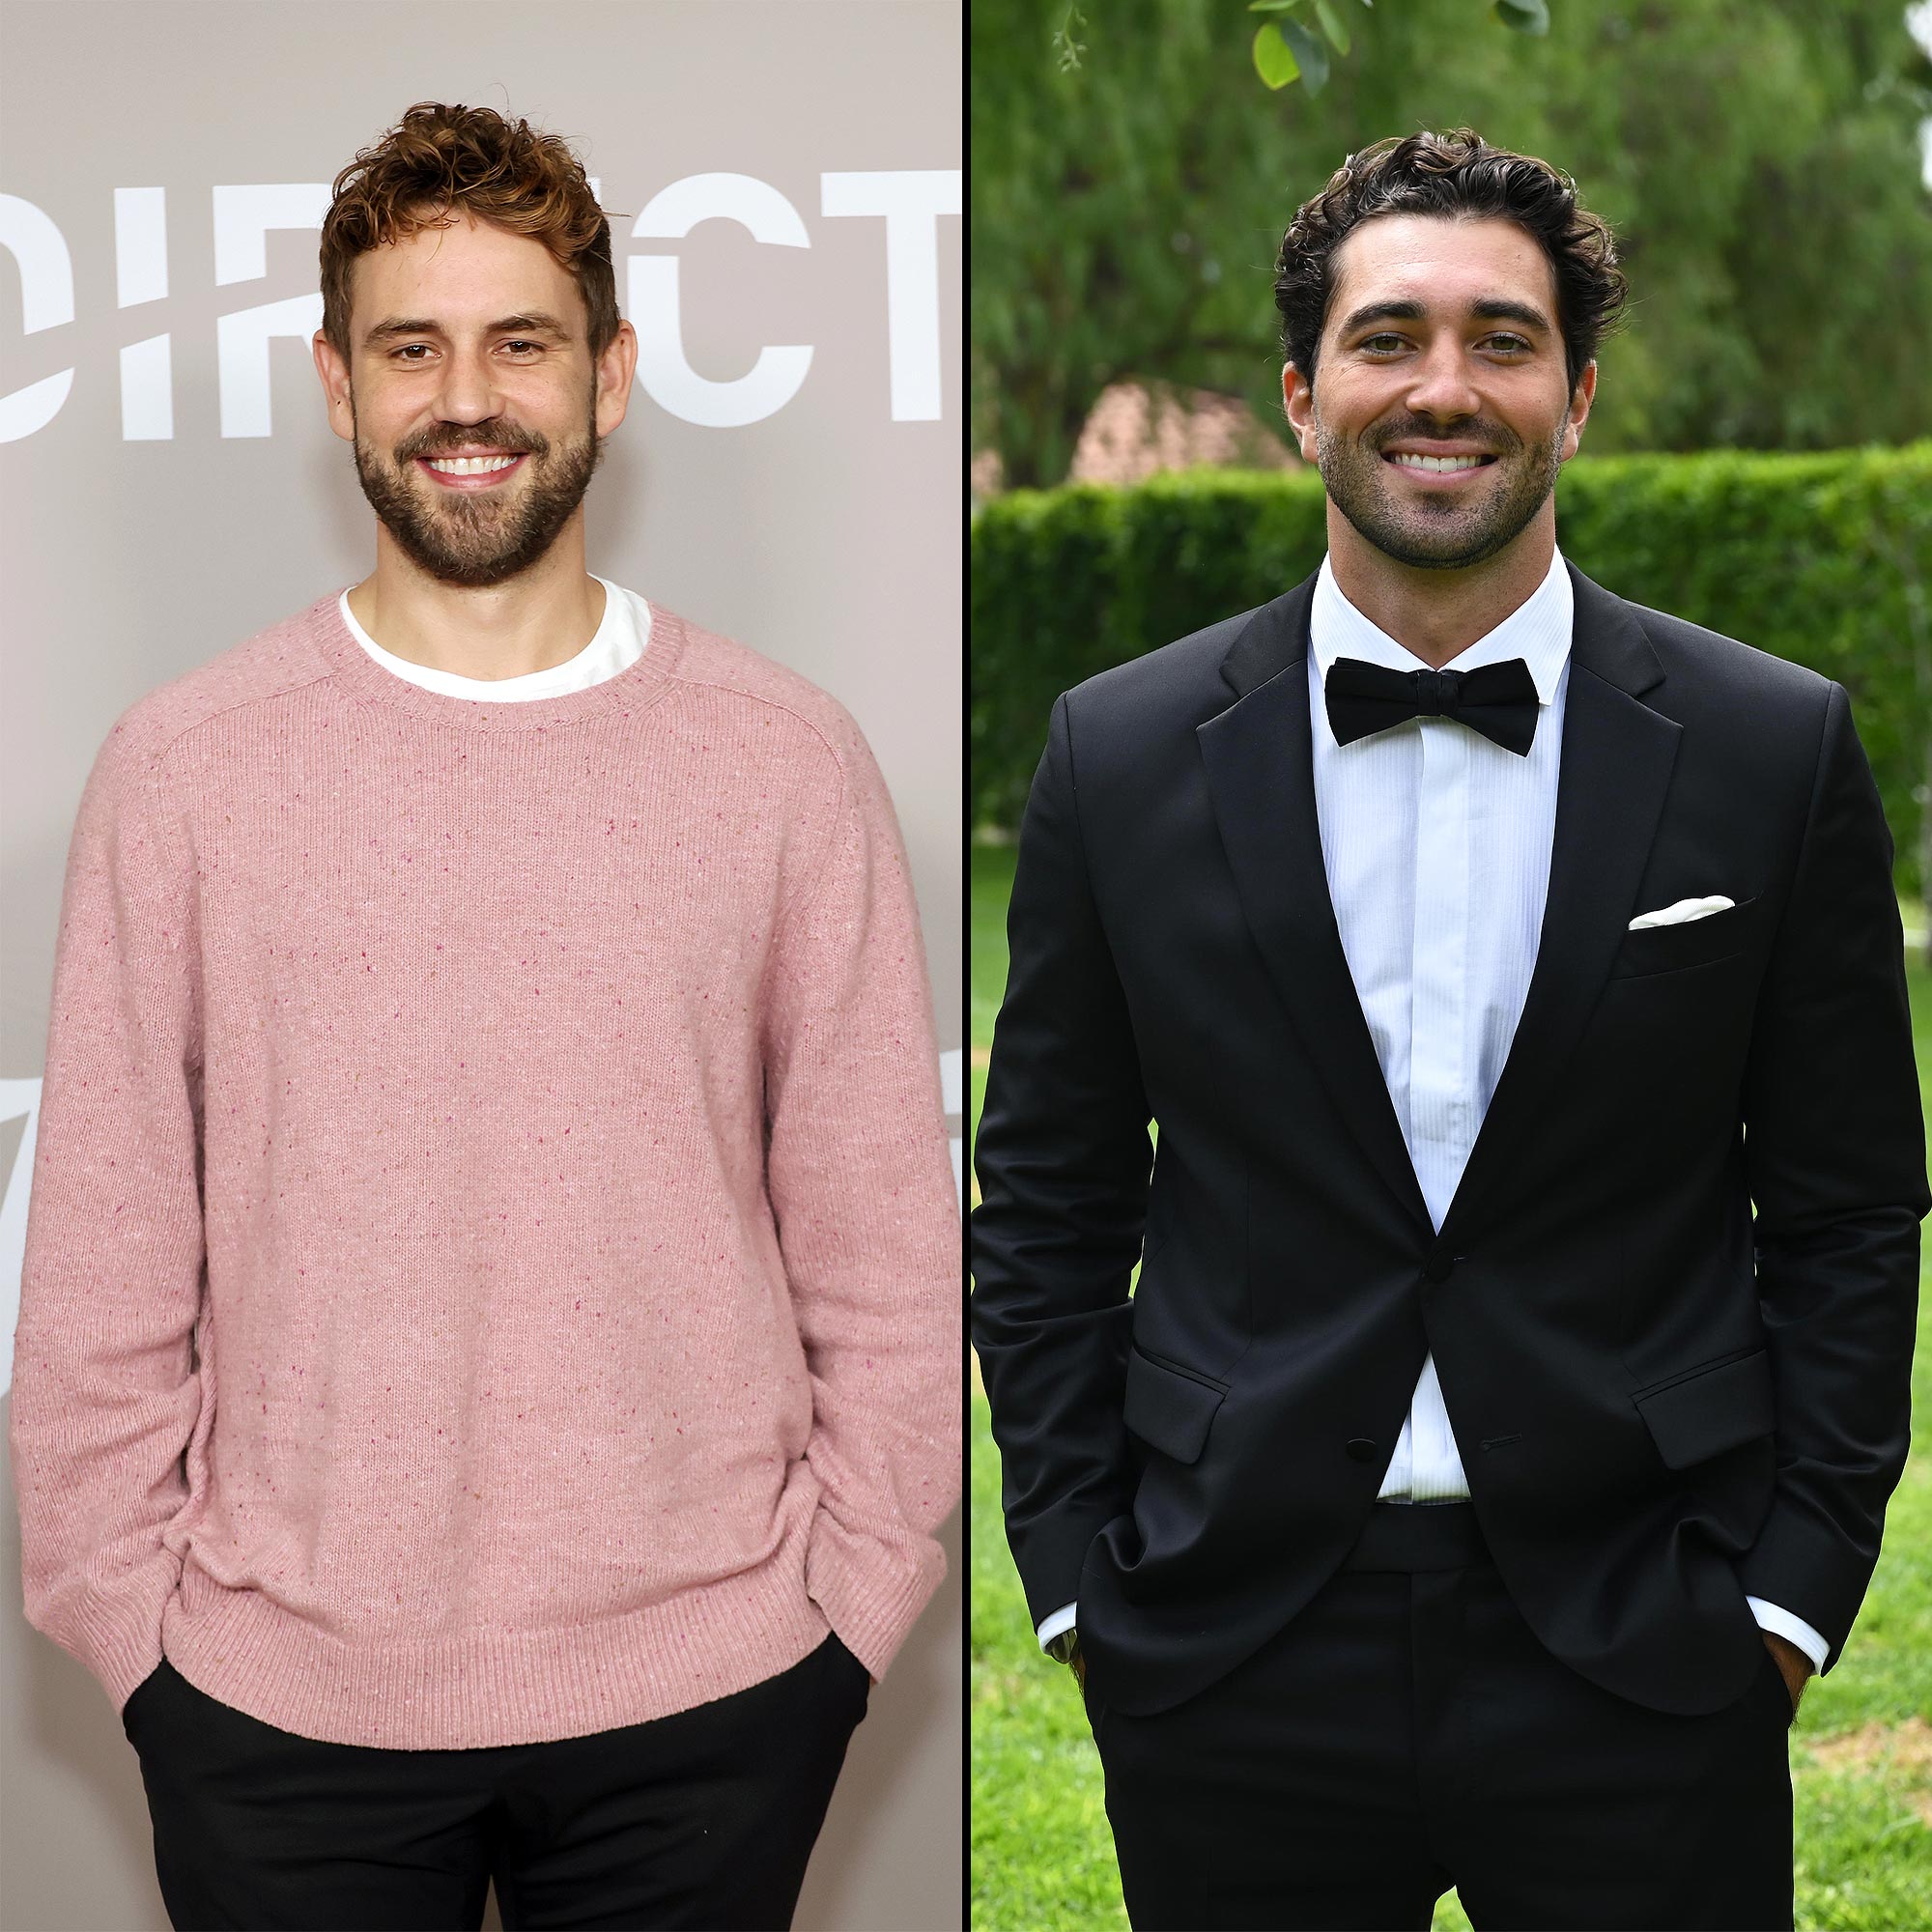 Nick Viall Suggests Bachelor Joey Graziadei Is Taking the ‘Easy Way Out’